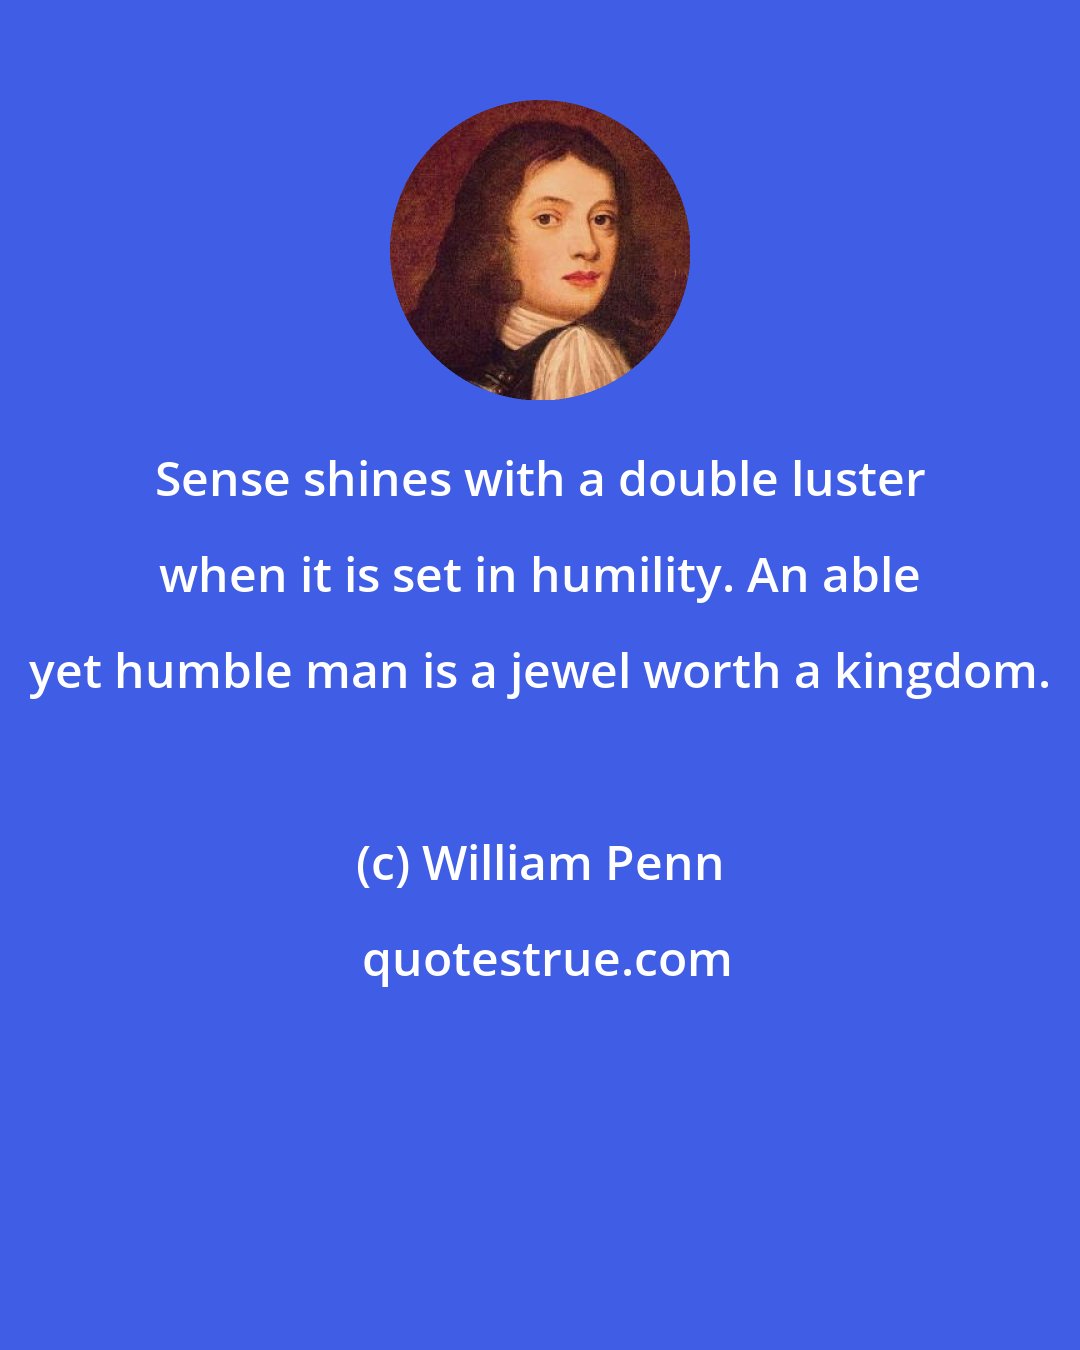 William Penn: Sense shines with a double luster when it is set in humility. An able yet humble man is a jewel worth a kingdom.